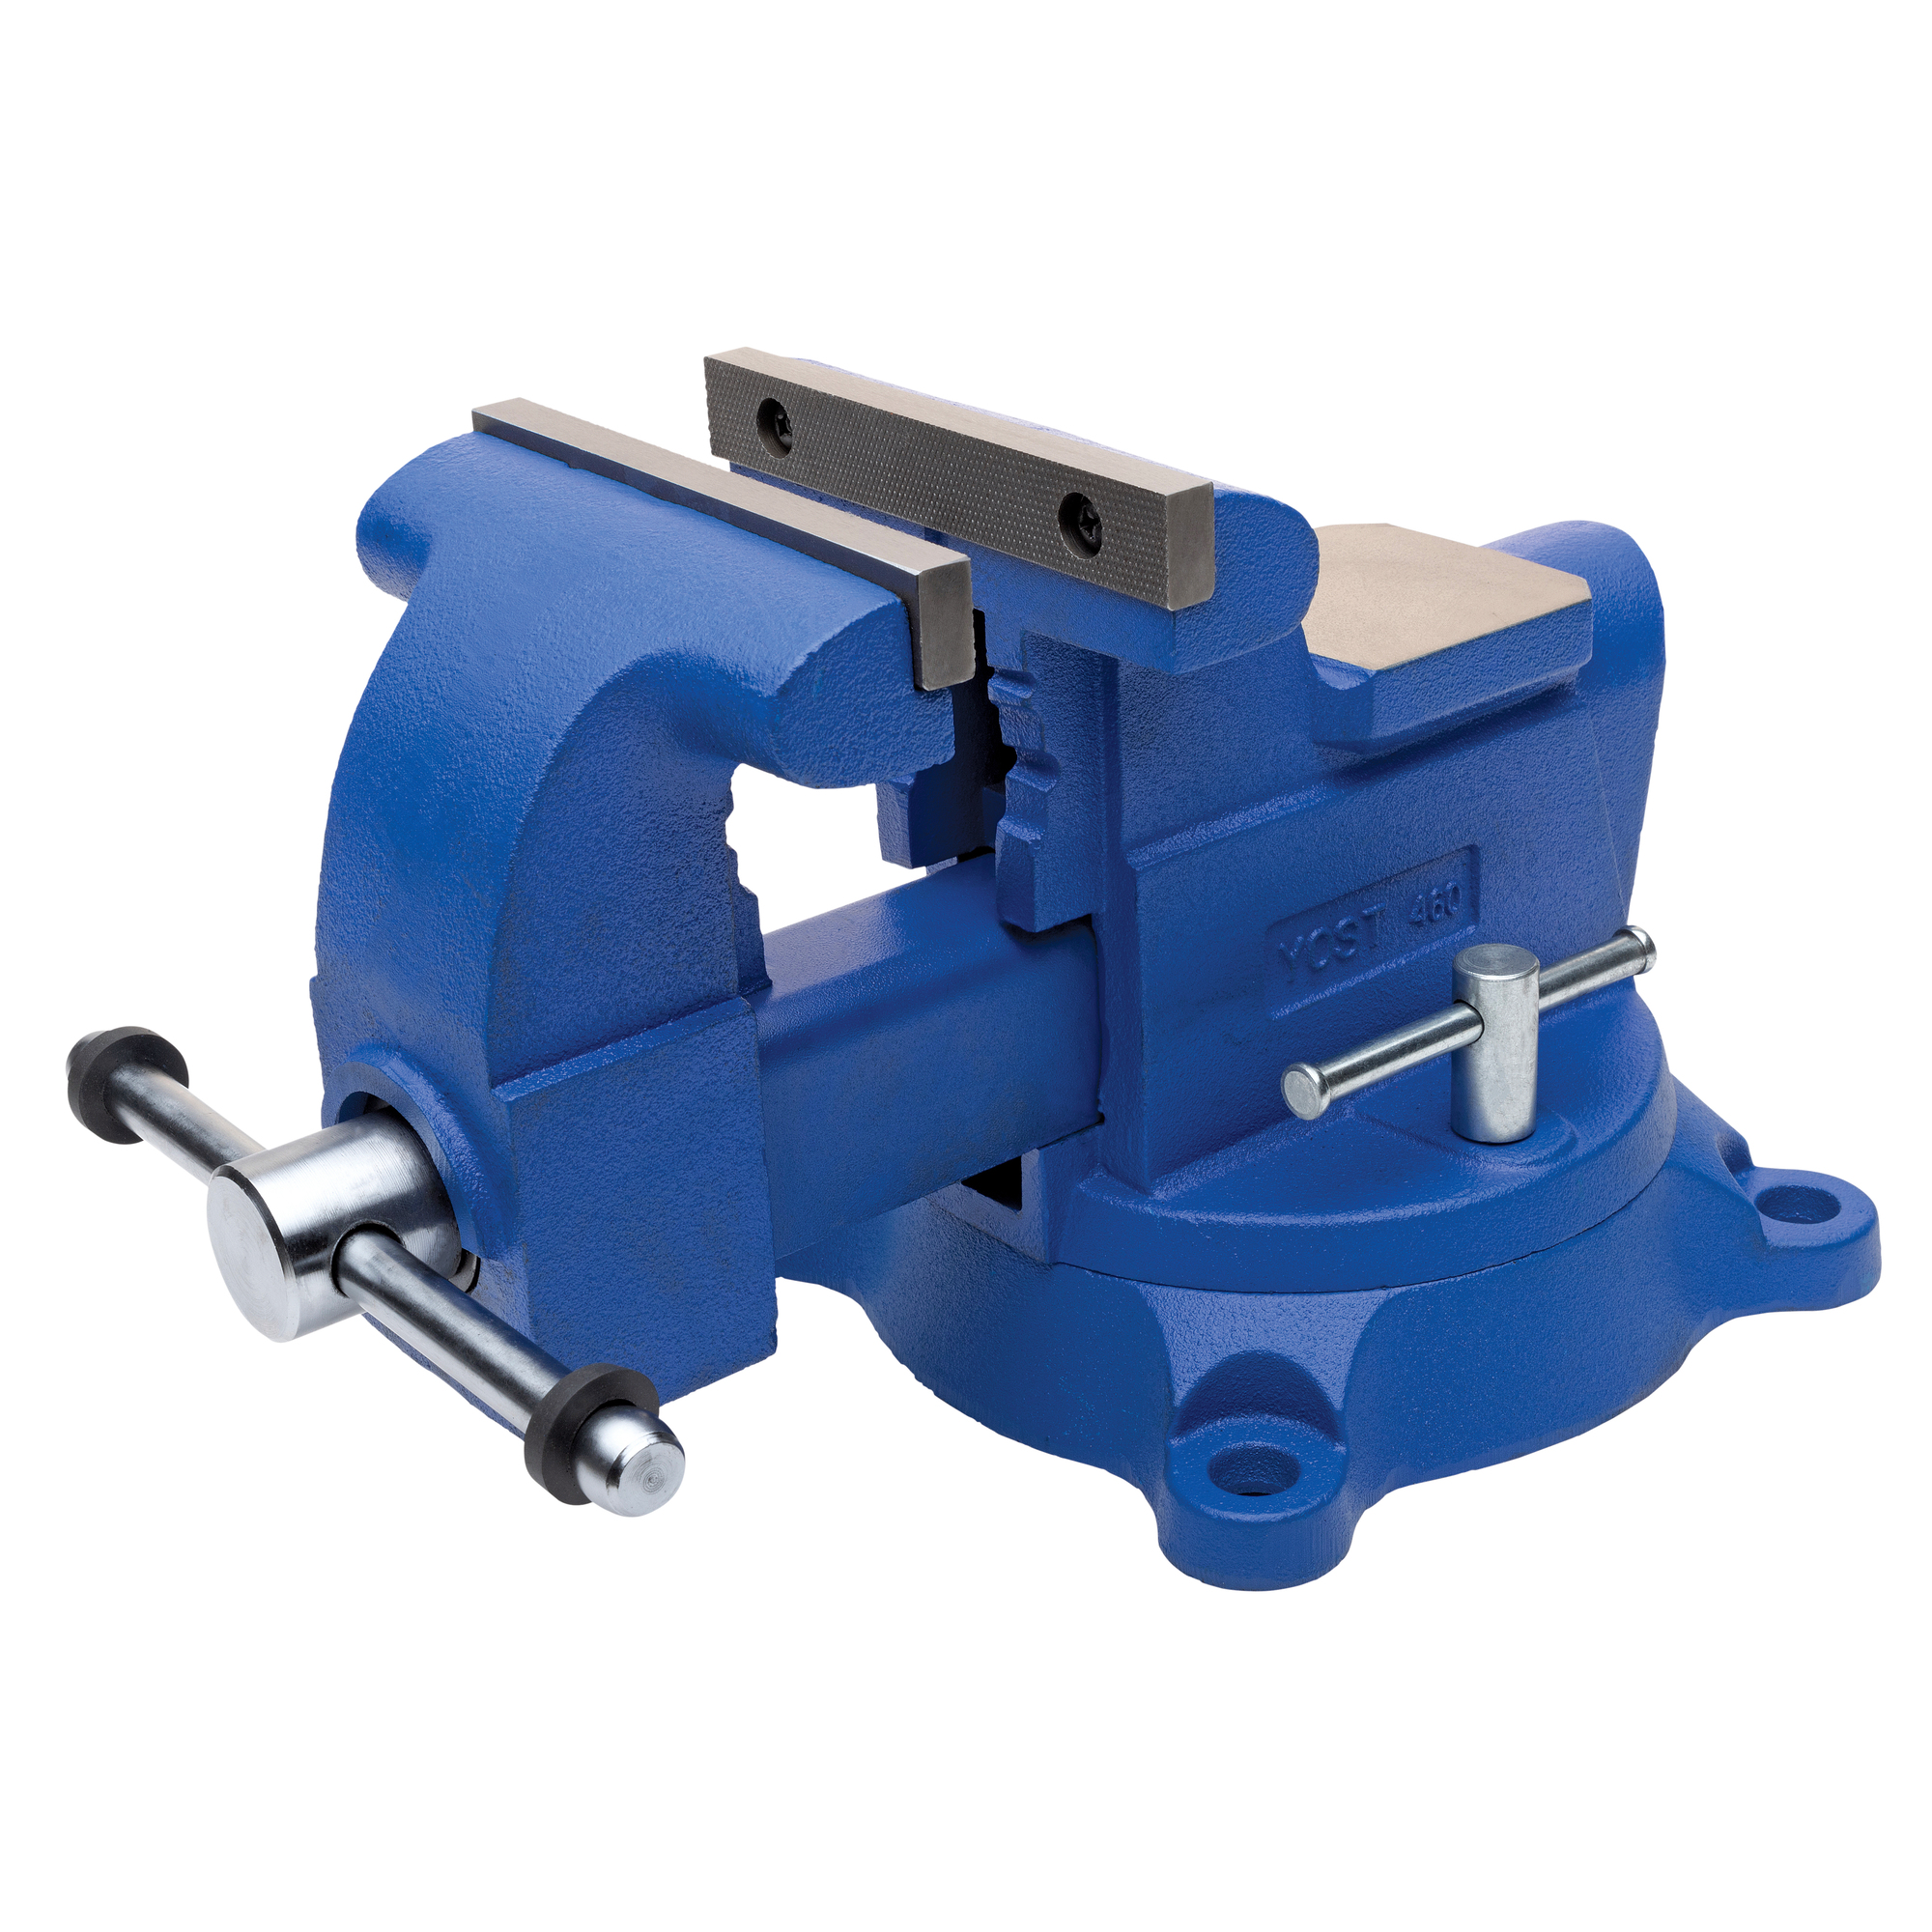 Yost Vises, 6Inch Utility Bench Vise, Jaw Width 6 in, Jaw Capacity 6 in, Material Cast Iron, Model 460